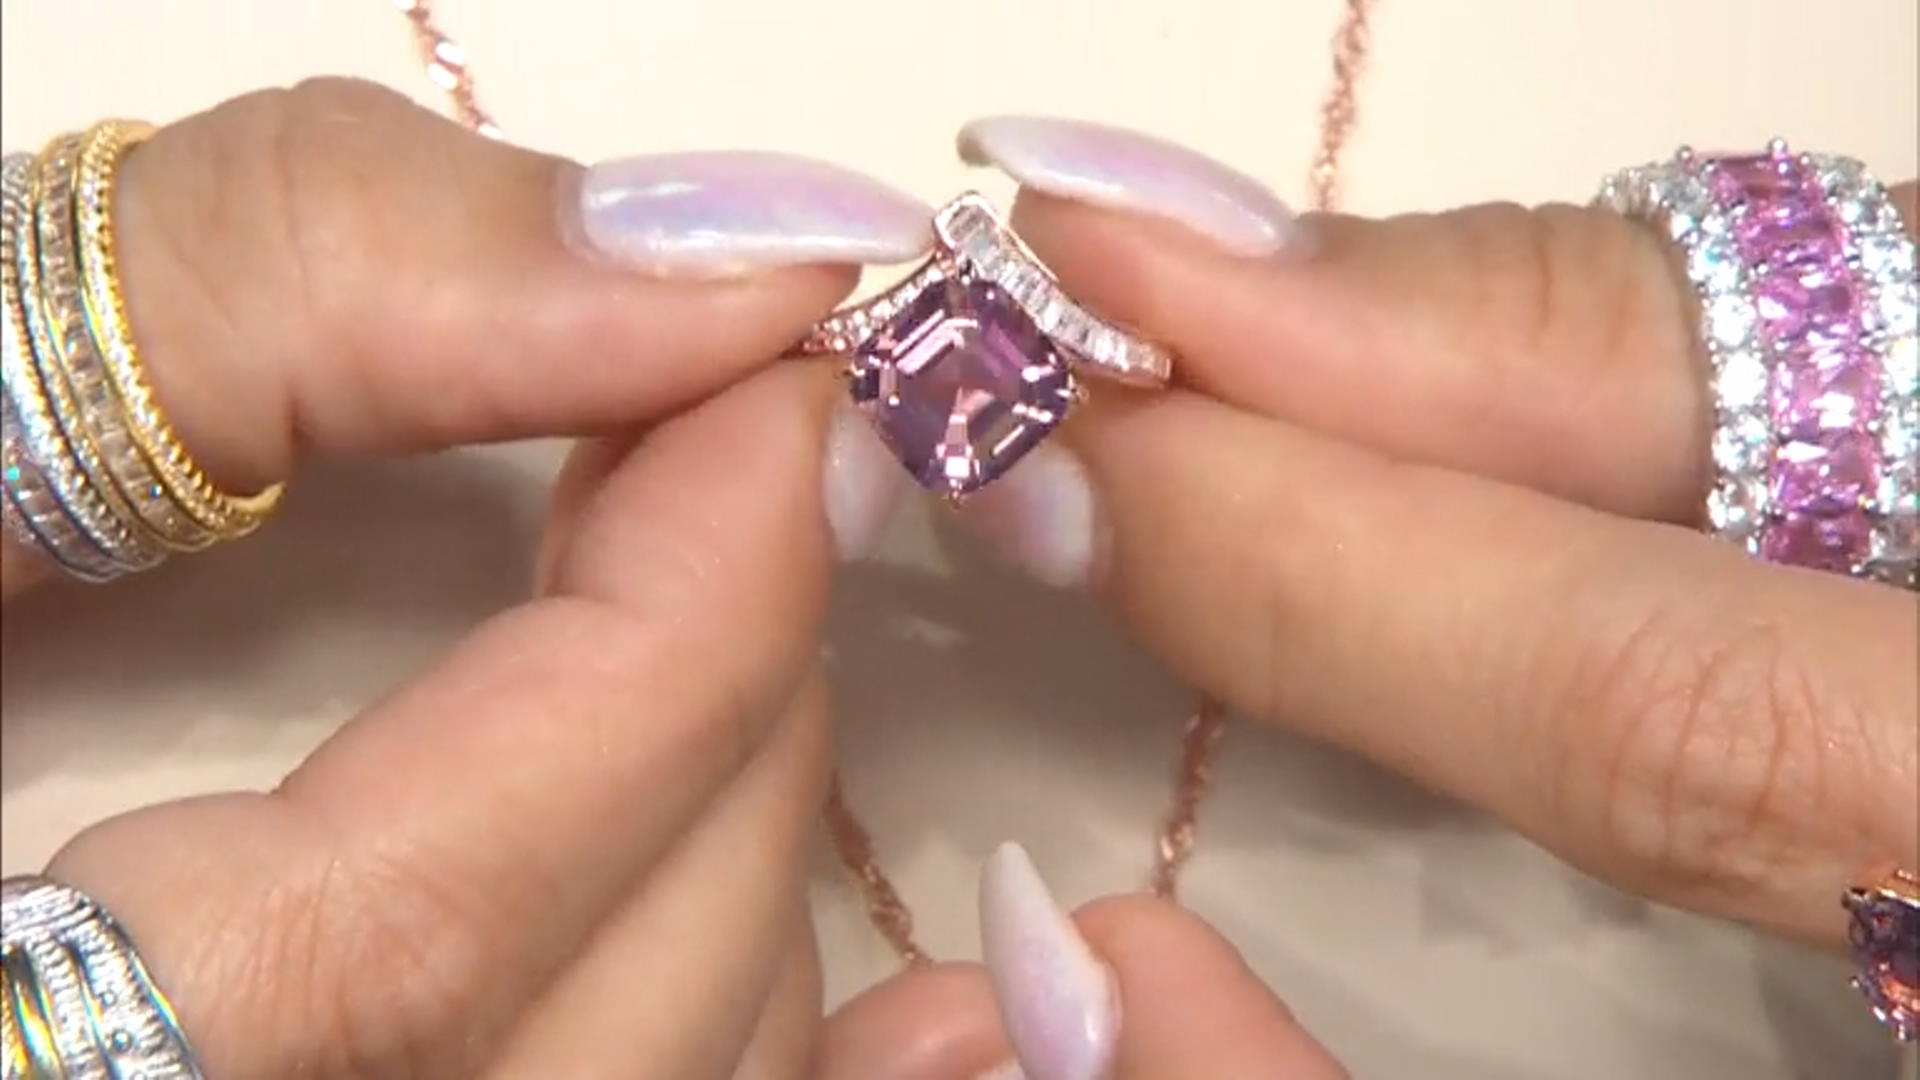 Blush Zircon Simulant And White Cubic Zirconia 18k Rose Gold Over Silver Asscher Cut Ring 6.65ctw Video Thumbnail